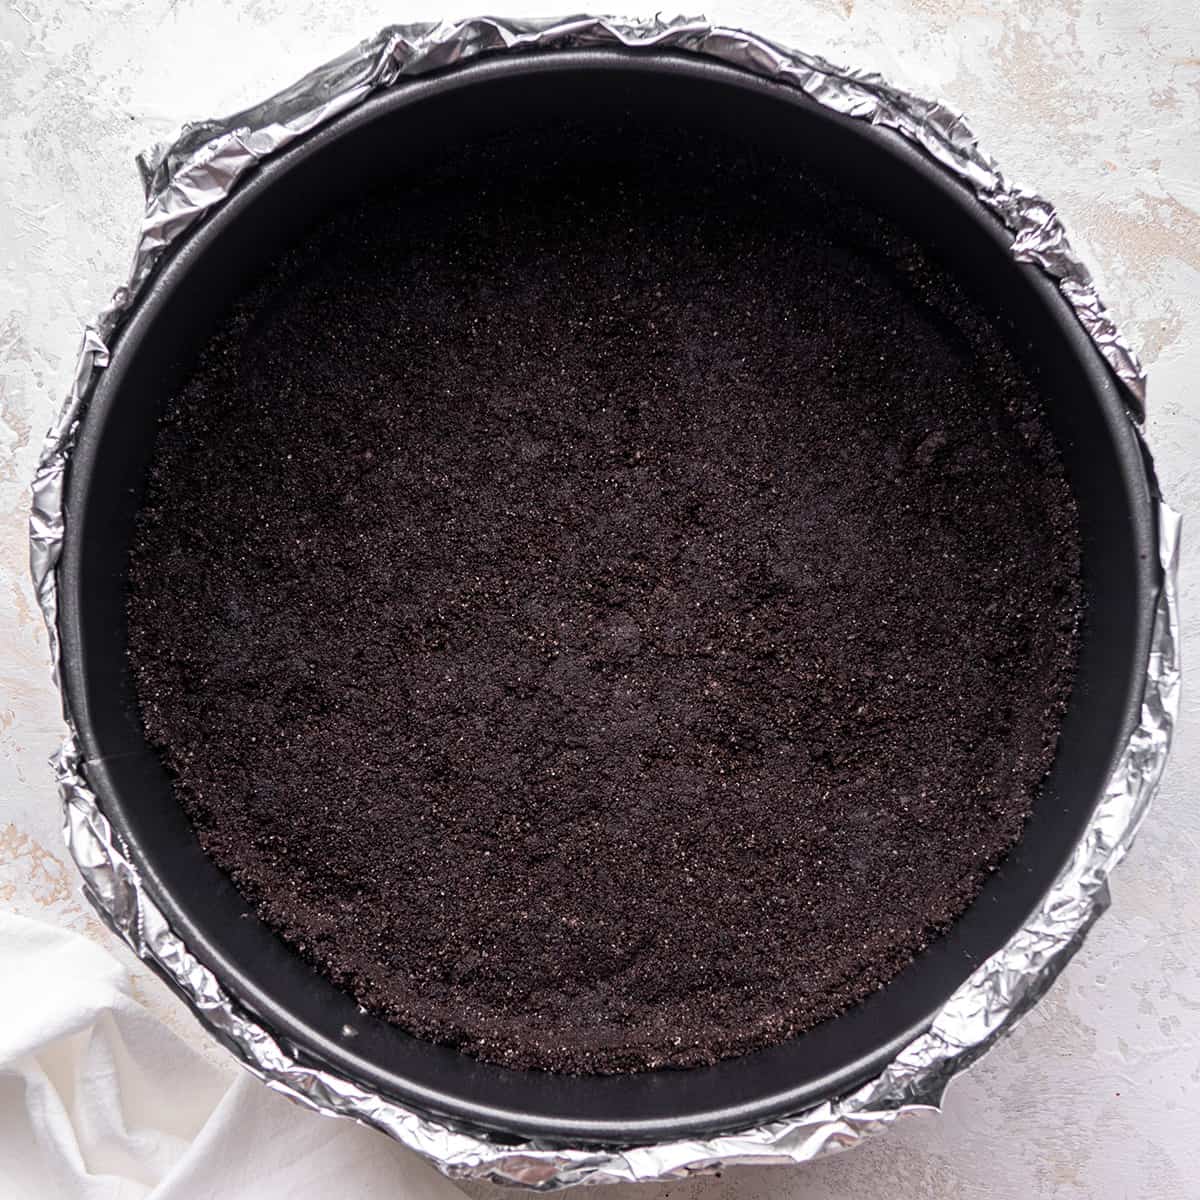 two photos showing How to Make Chocolate Cheesecake - Oreo crust after baking 